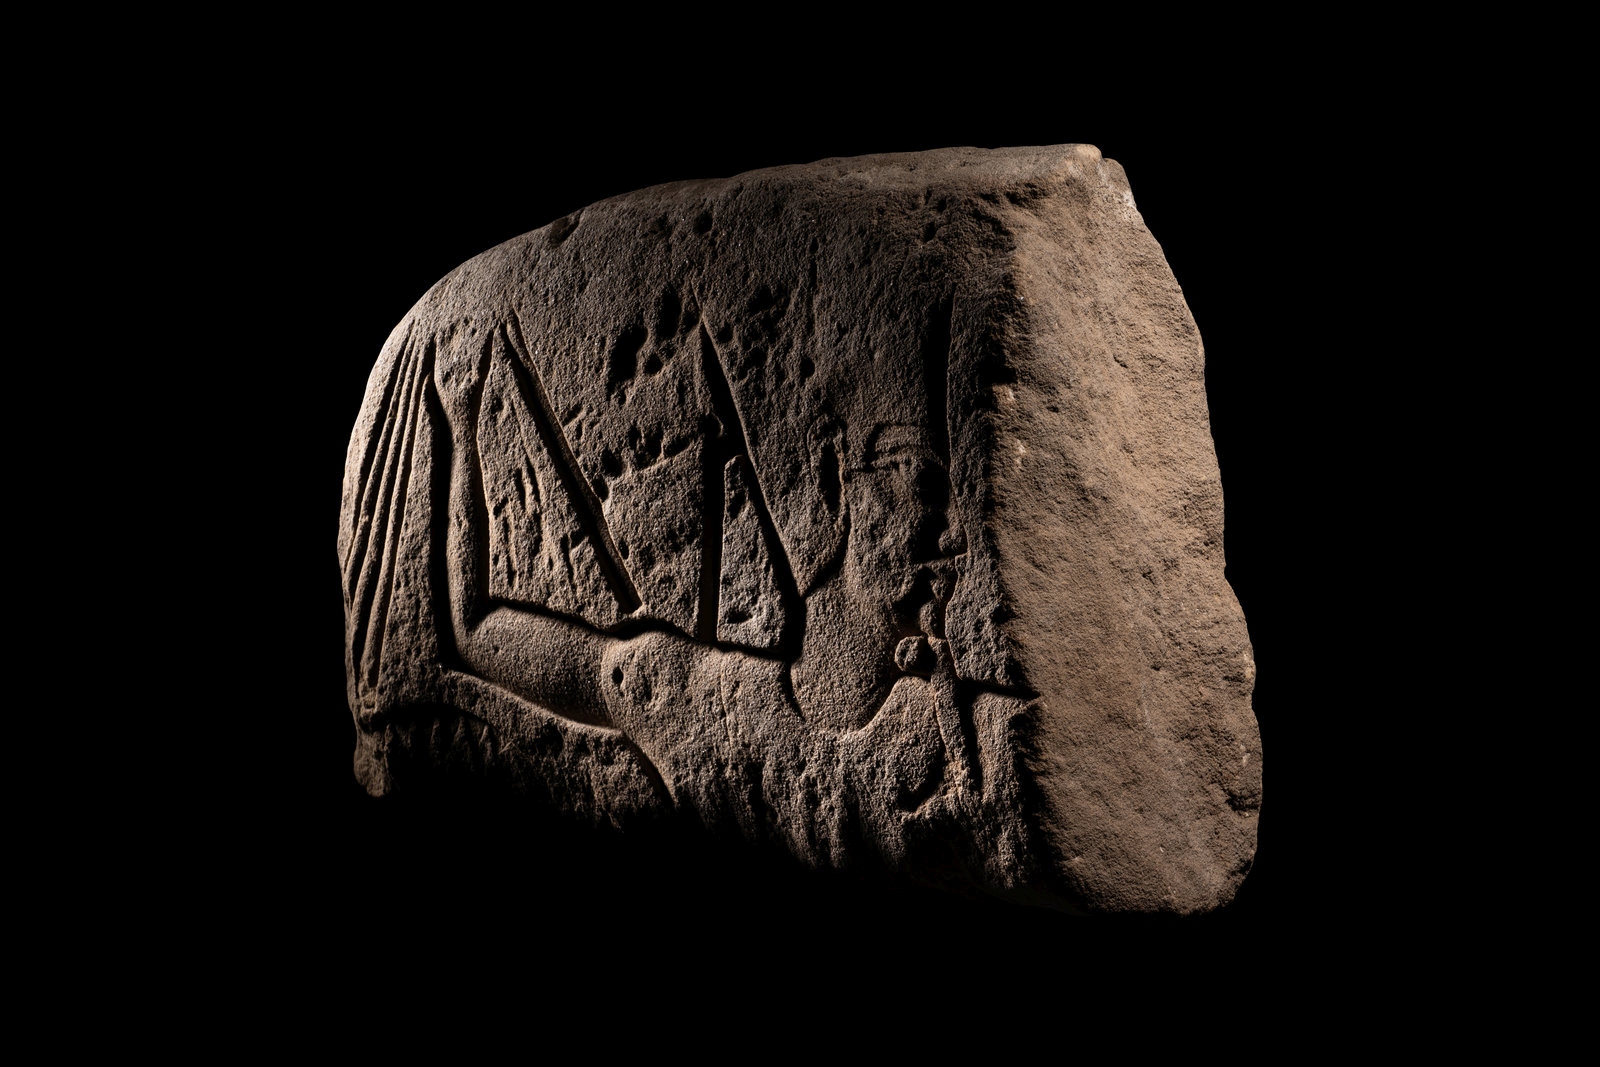 An Egyptian Sandstone Relief Length 17 1/2 inches (44.5 cm). - Image 2 of 3